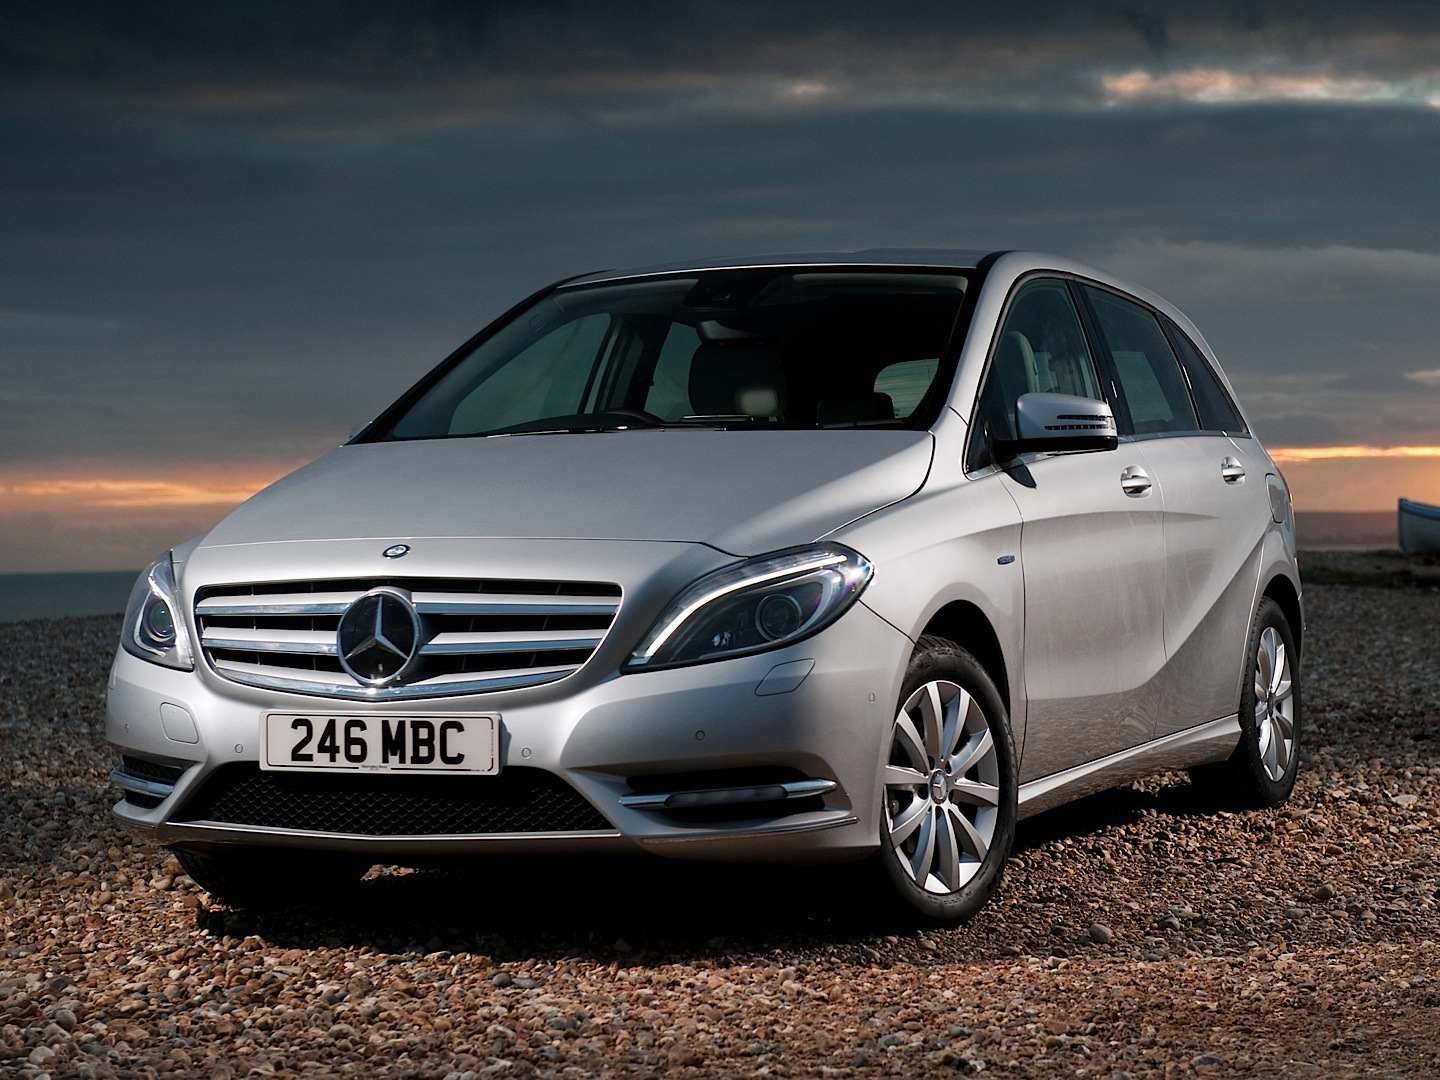 A-Class and B-Class to Have ECO And More 4Matic Versions in The UK